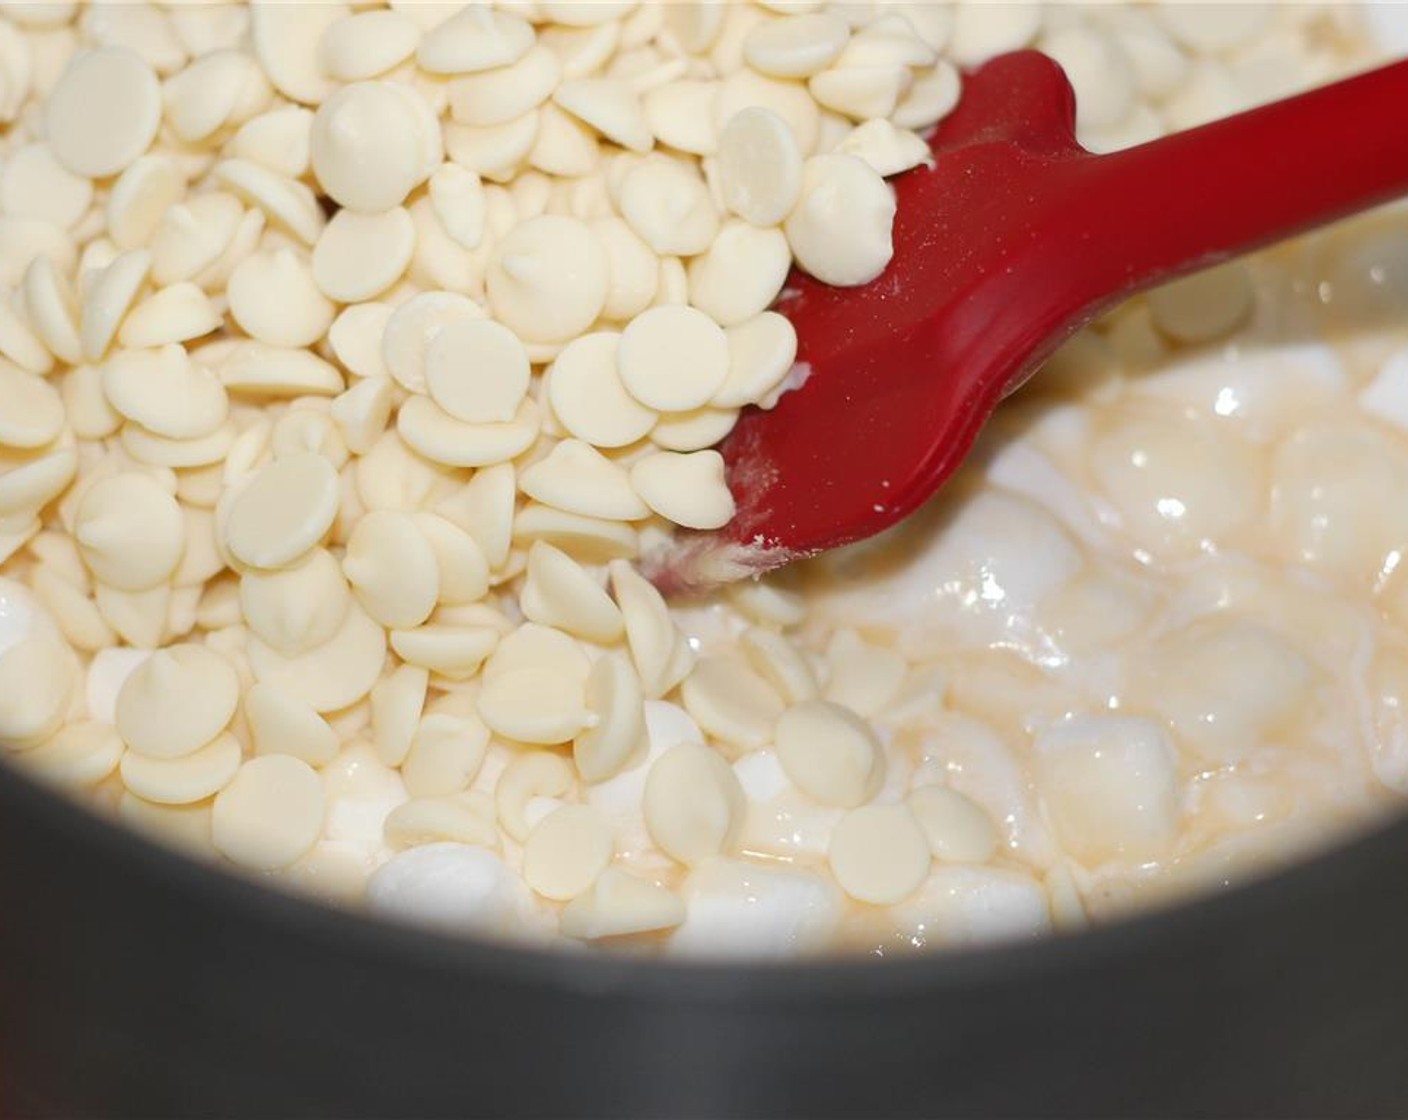 step 2 Remove heat and stir in Mini Marshmallows (1 2/3 cups), White Chocolate Chips (2 cups), Bailey's® Irish Cream (3 Tbsp), and Vanilla Extract (1 tsp). If mixture begins to harden, return to stove and heat on low until mixture is smooth.